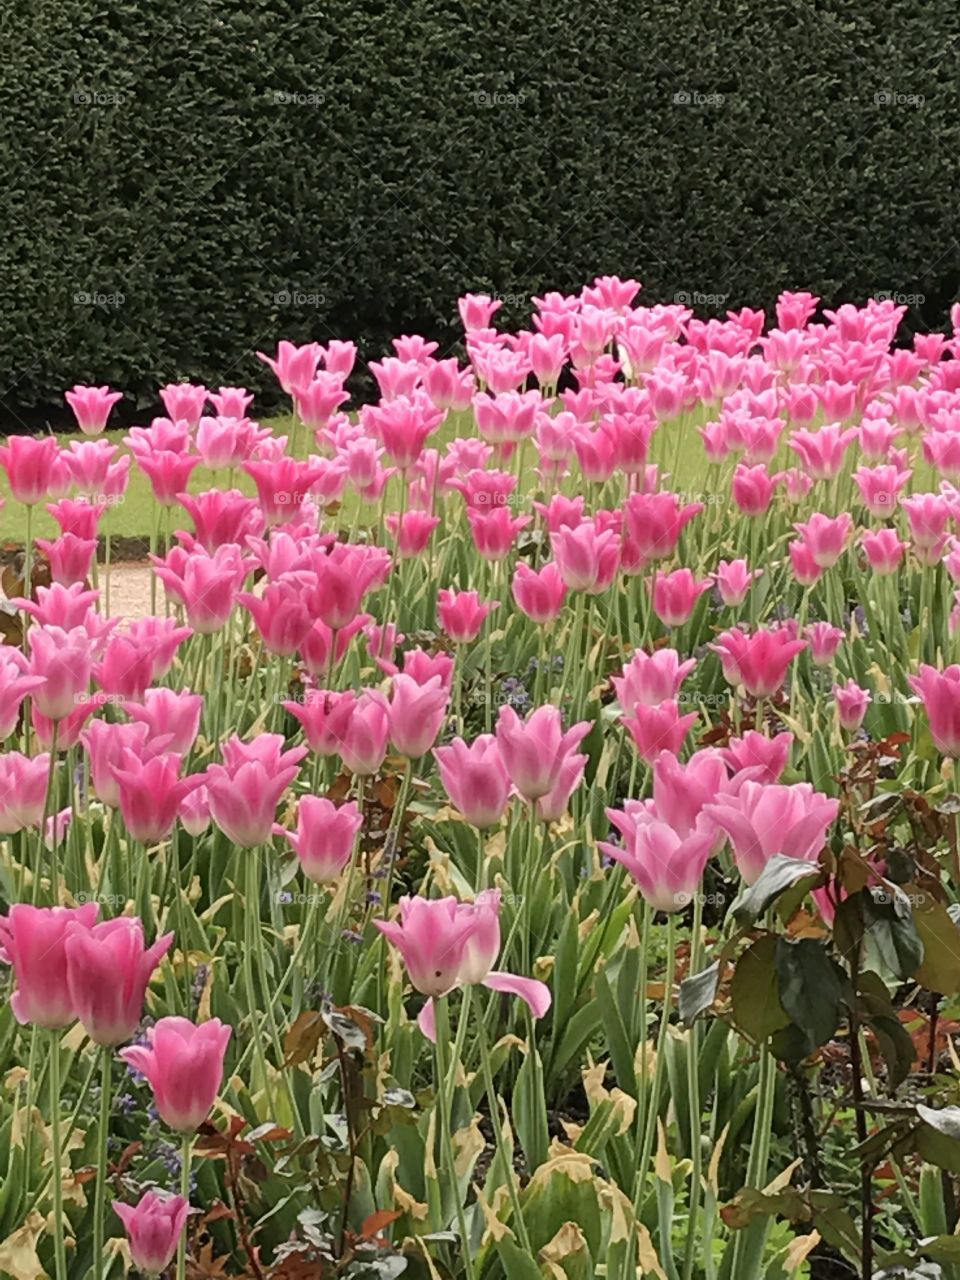 Tulips pink